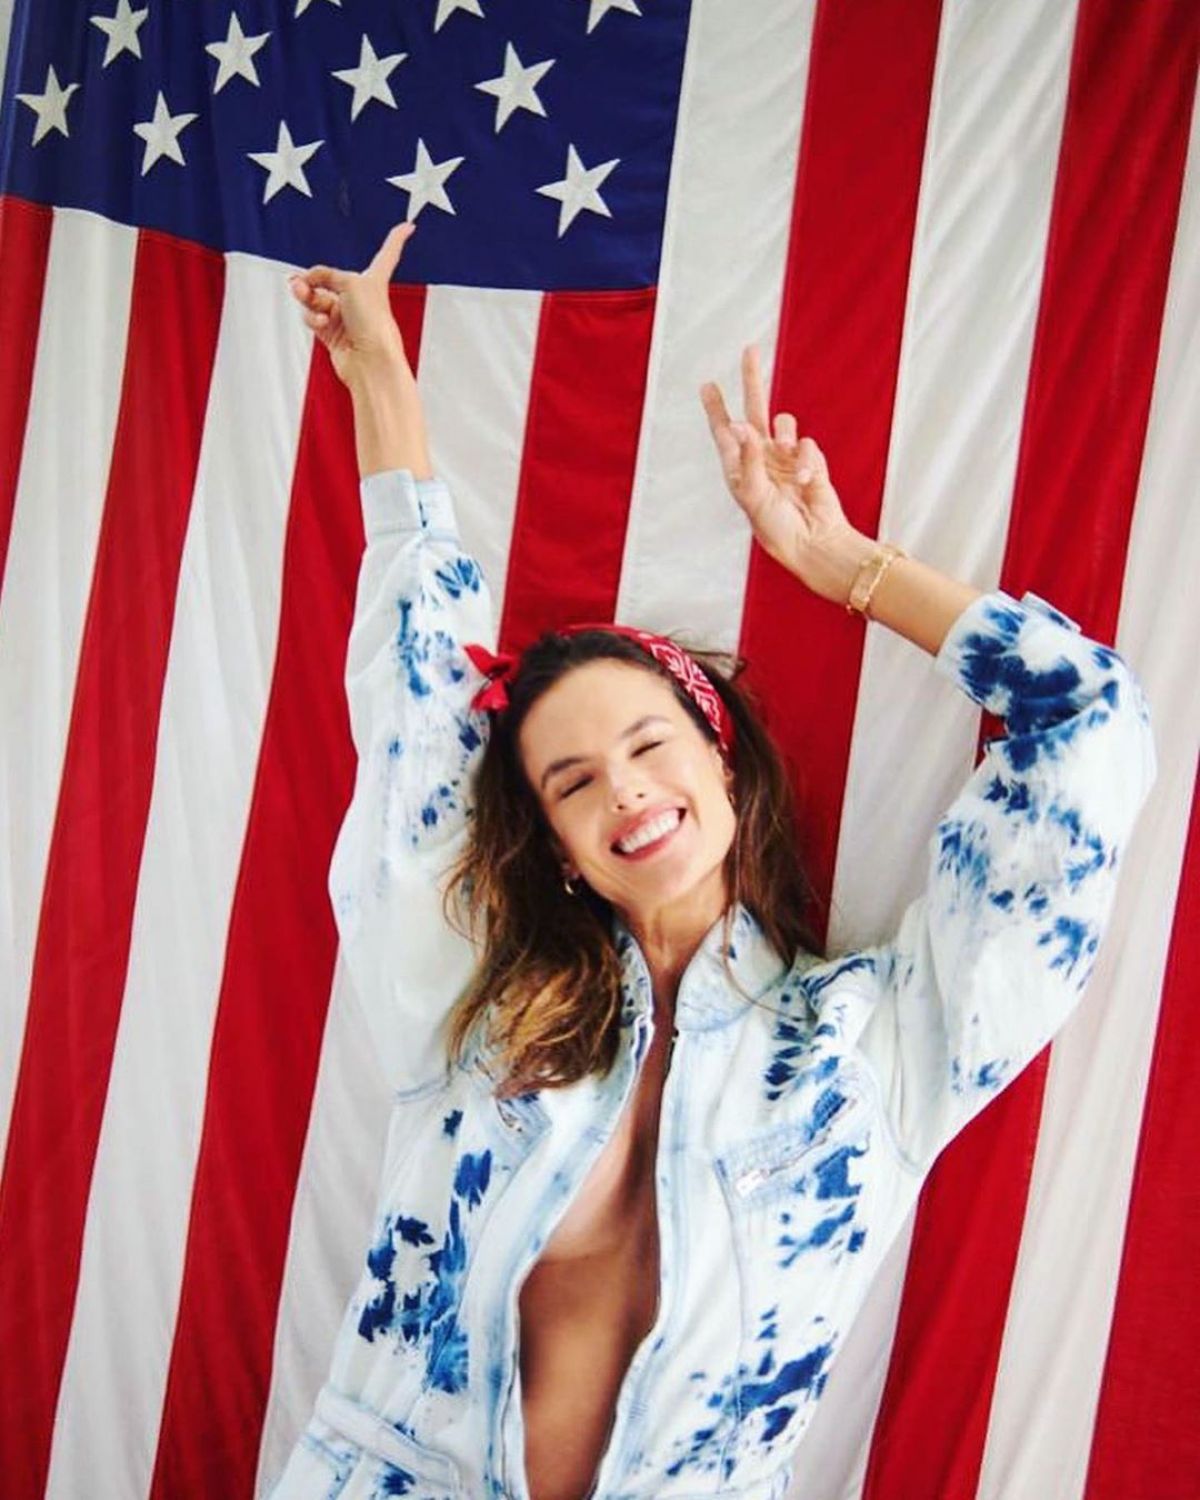 alessandra-ambrosio-independence-day-photoshoot-instagram-pictures-07-04-2019-1.jpg